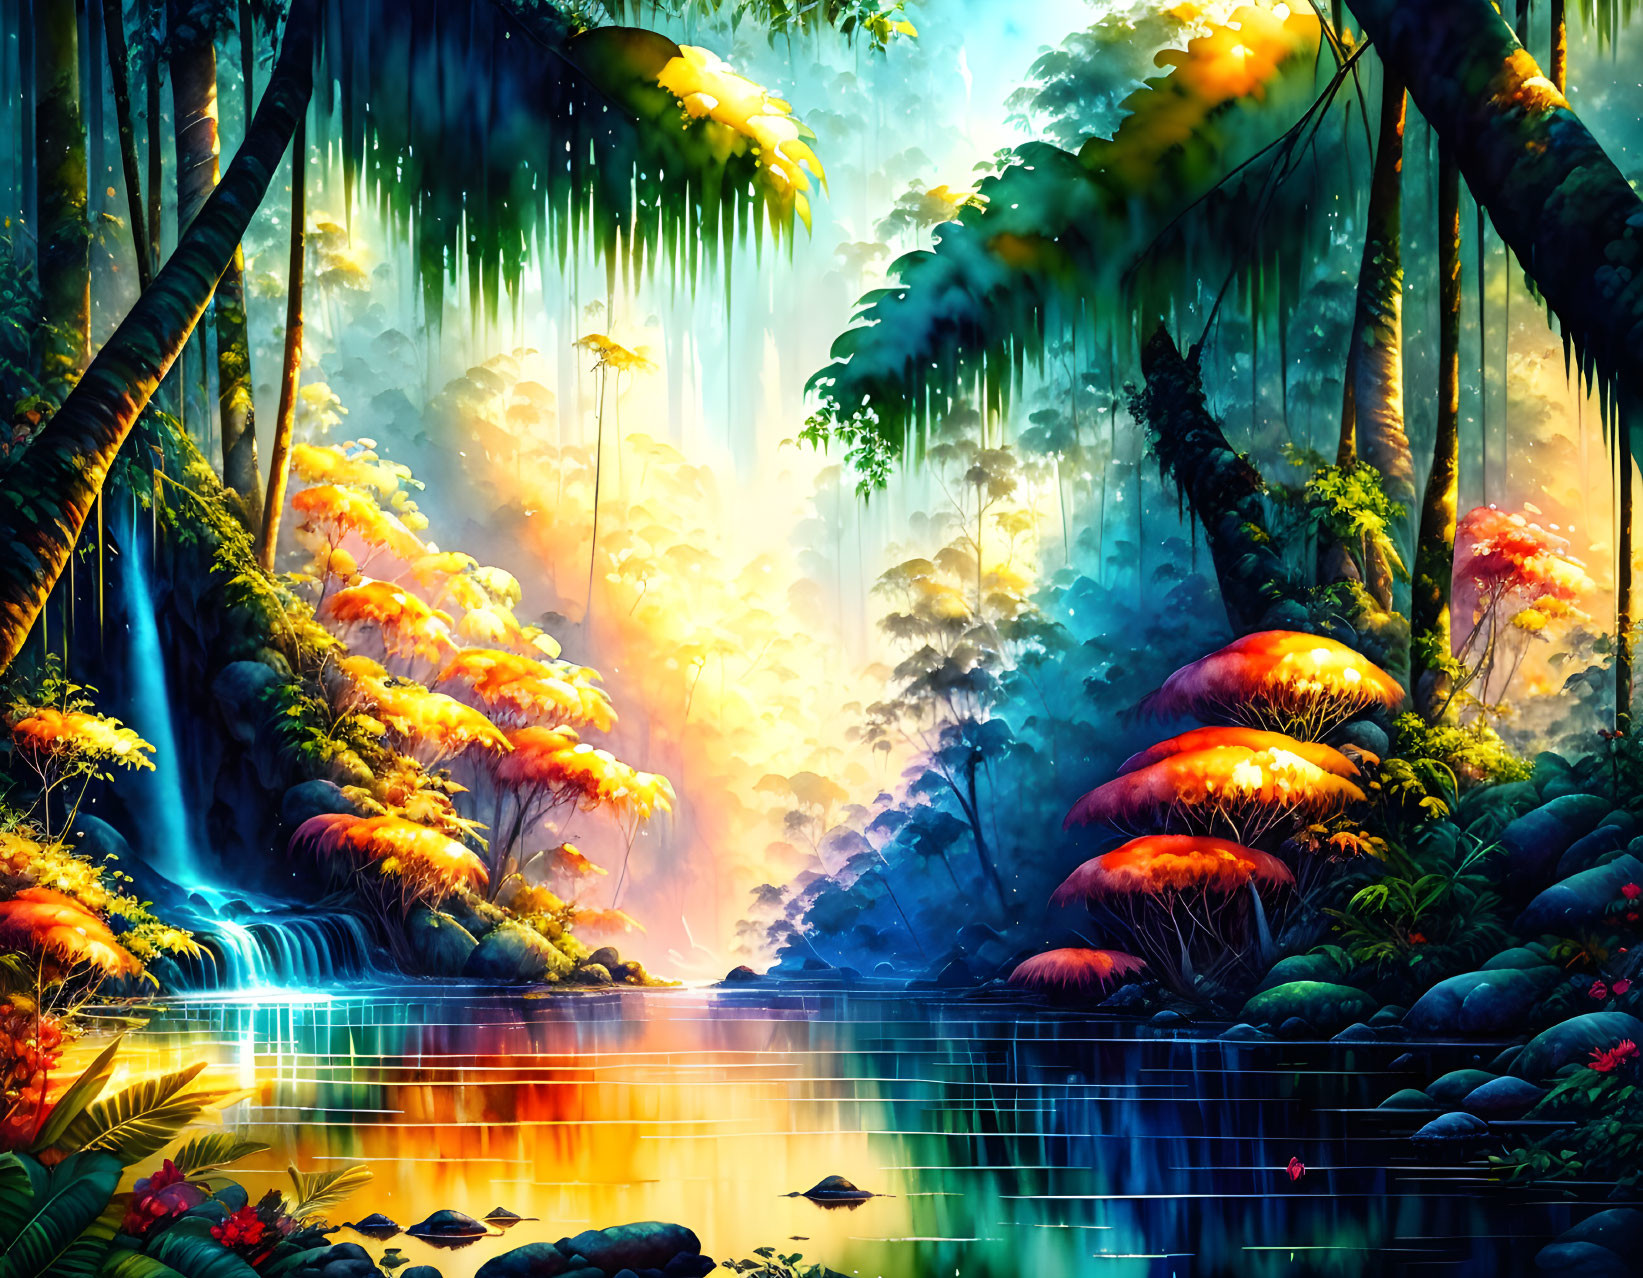 Colorful Digital Art: Mystical Jungle Scene with Glowing Mushrooms and Serene River